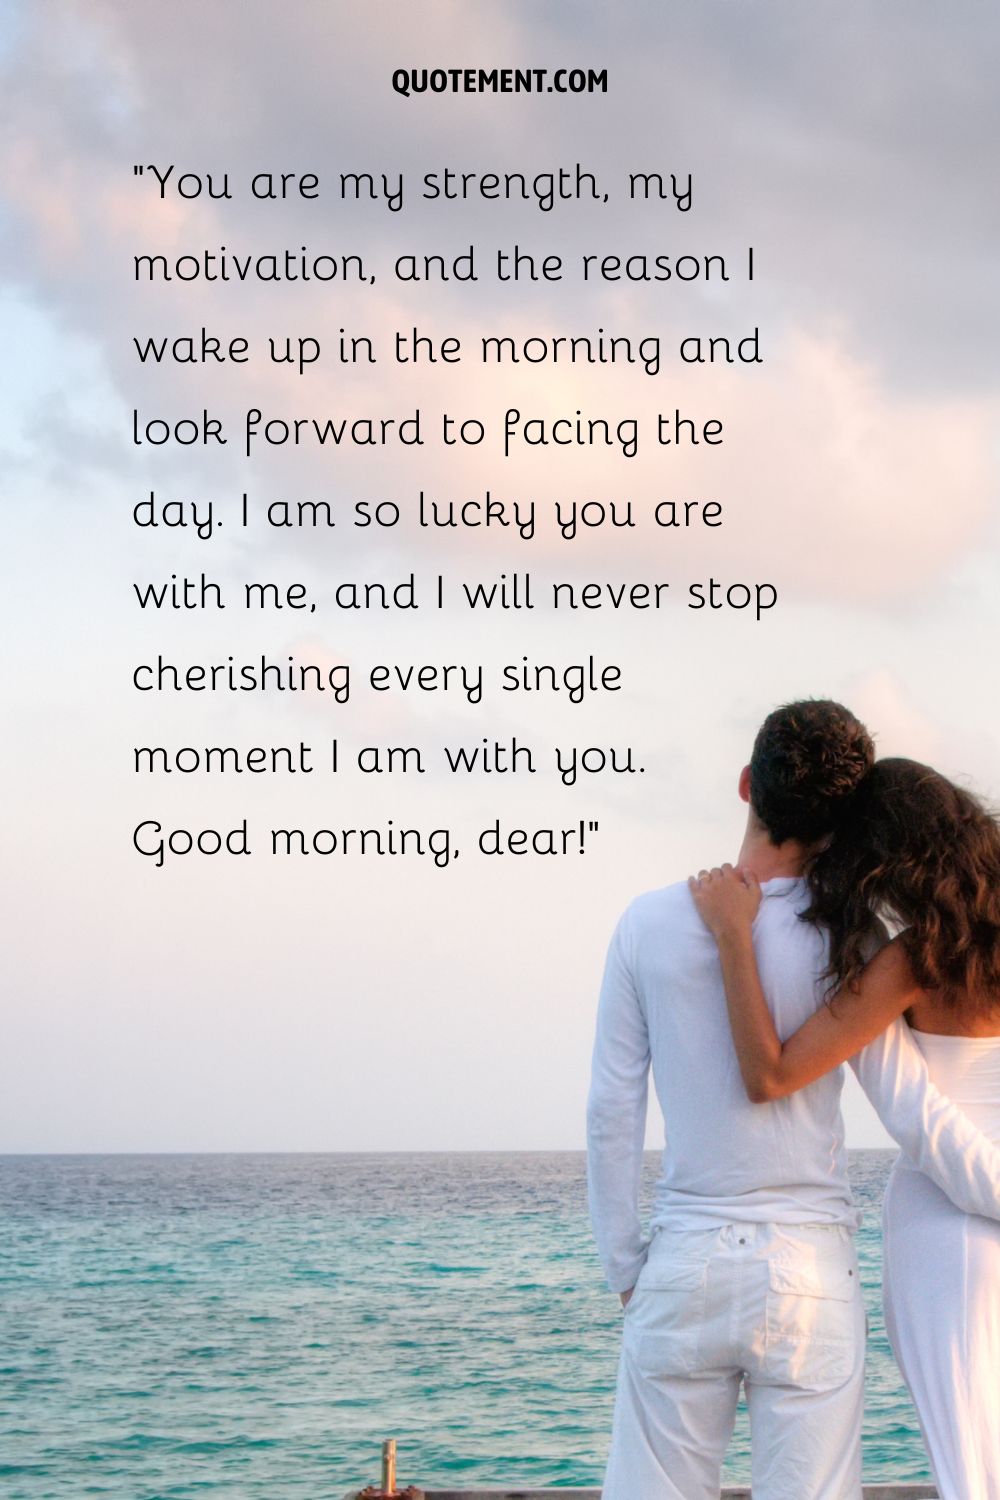 A couple standing on a dock and gazing at the sea representing a sweet paragraph for him to wake up to
